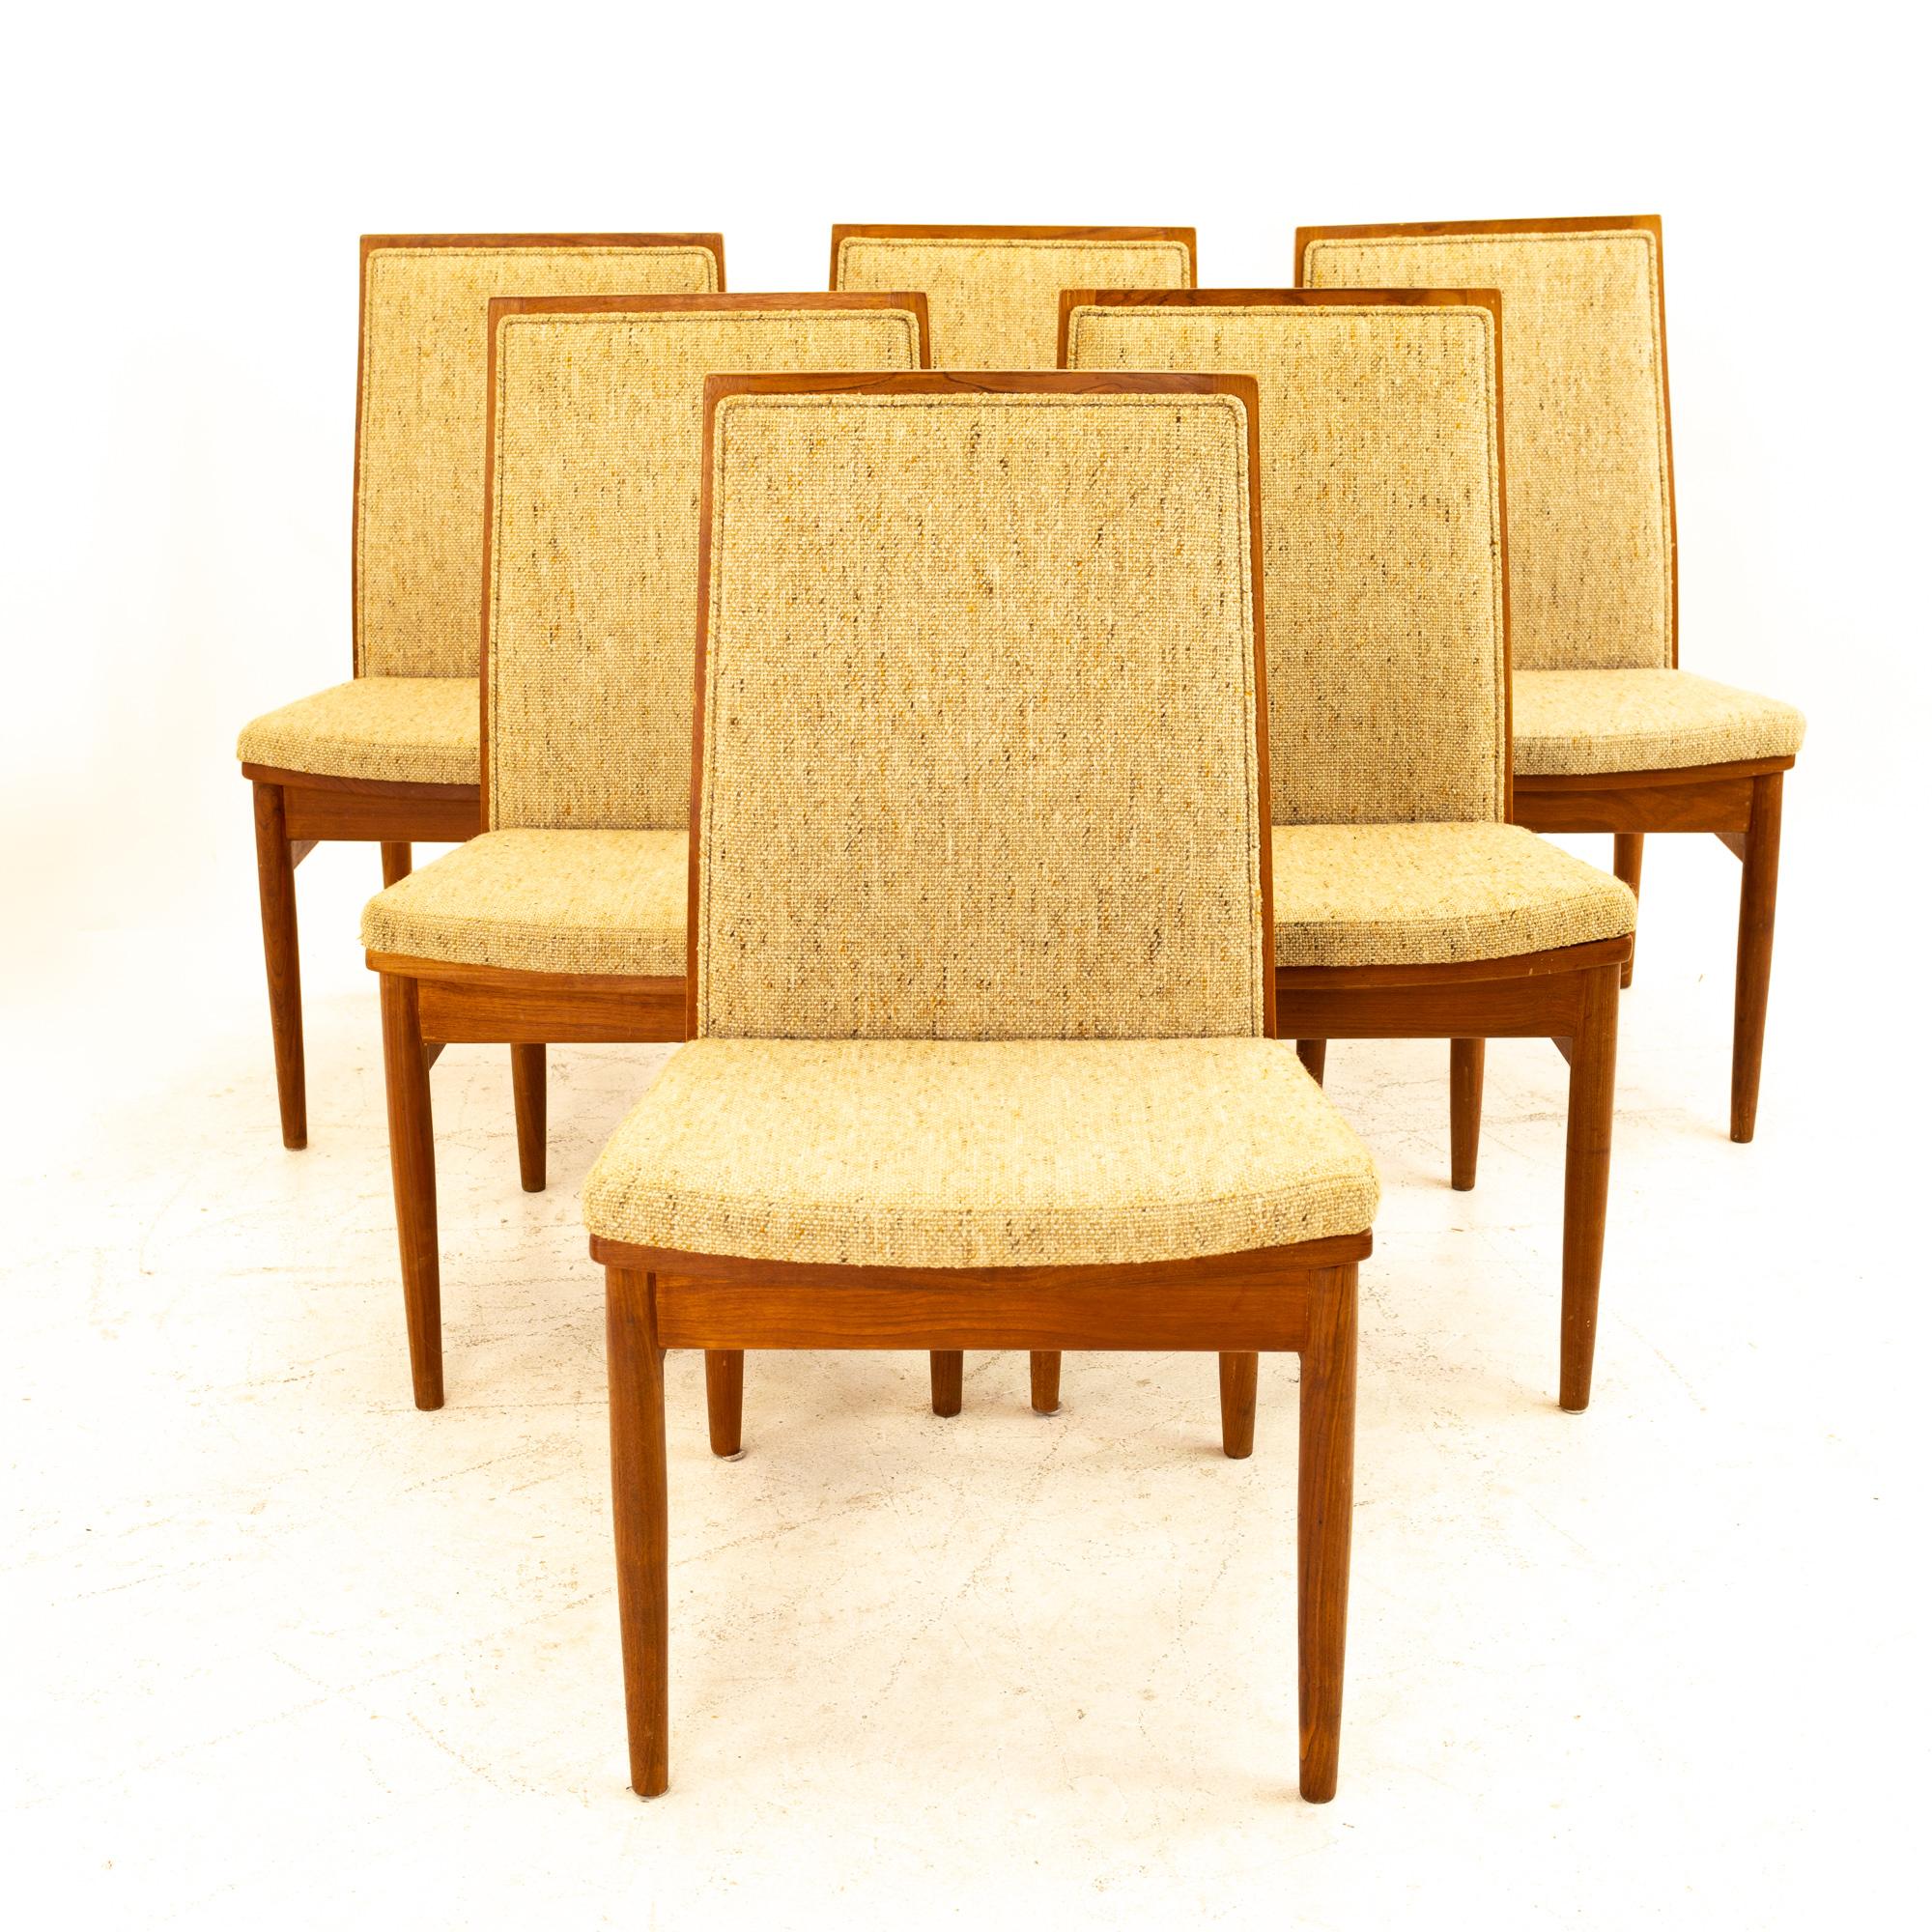 Dyrlund Mid Century teak upholstered dining chairs - set of 6
Each chair measures: 20 wide x 21.25 deep x 35.75 high, with a seat height of 18.5 inches

All pieces of furniture can be had in what we call restored vintage condition. That means the